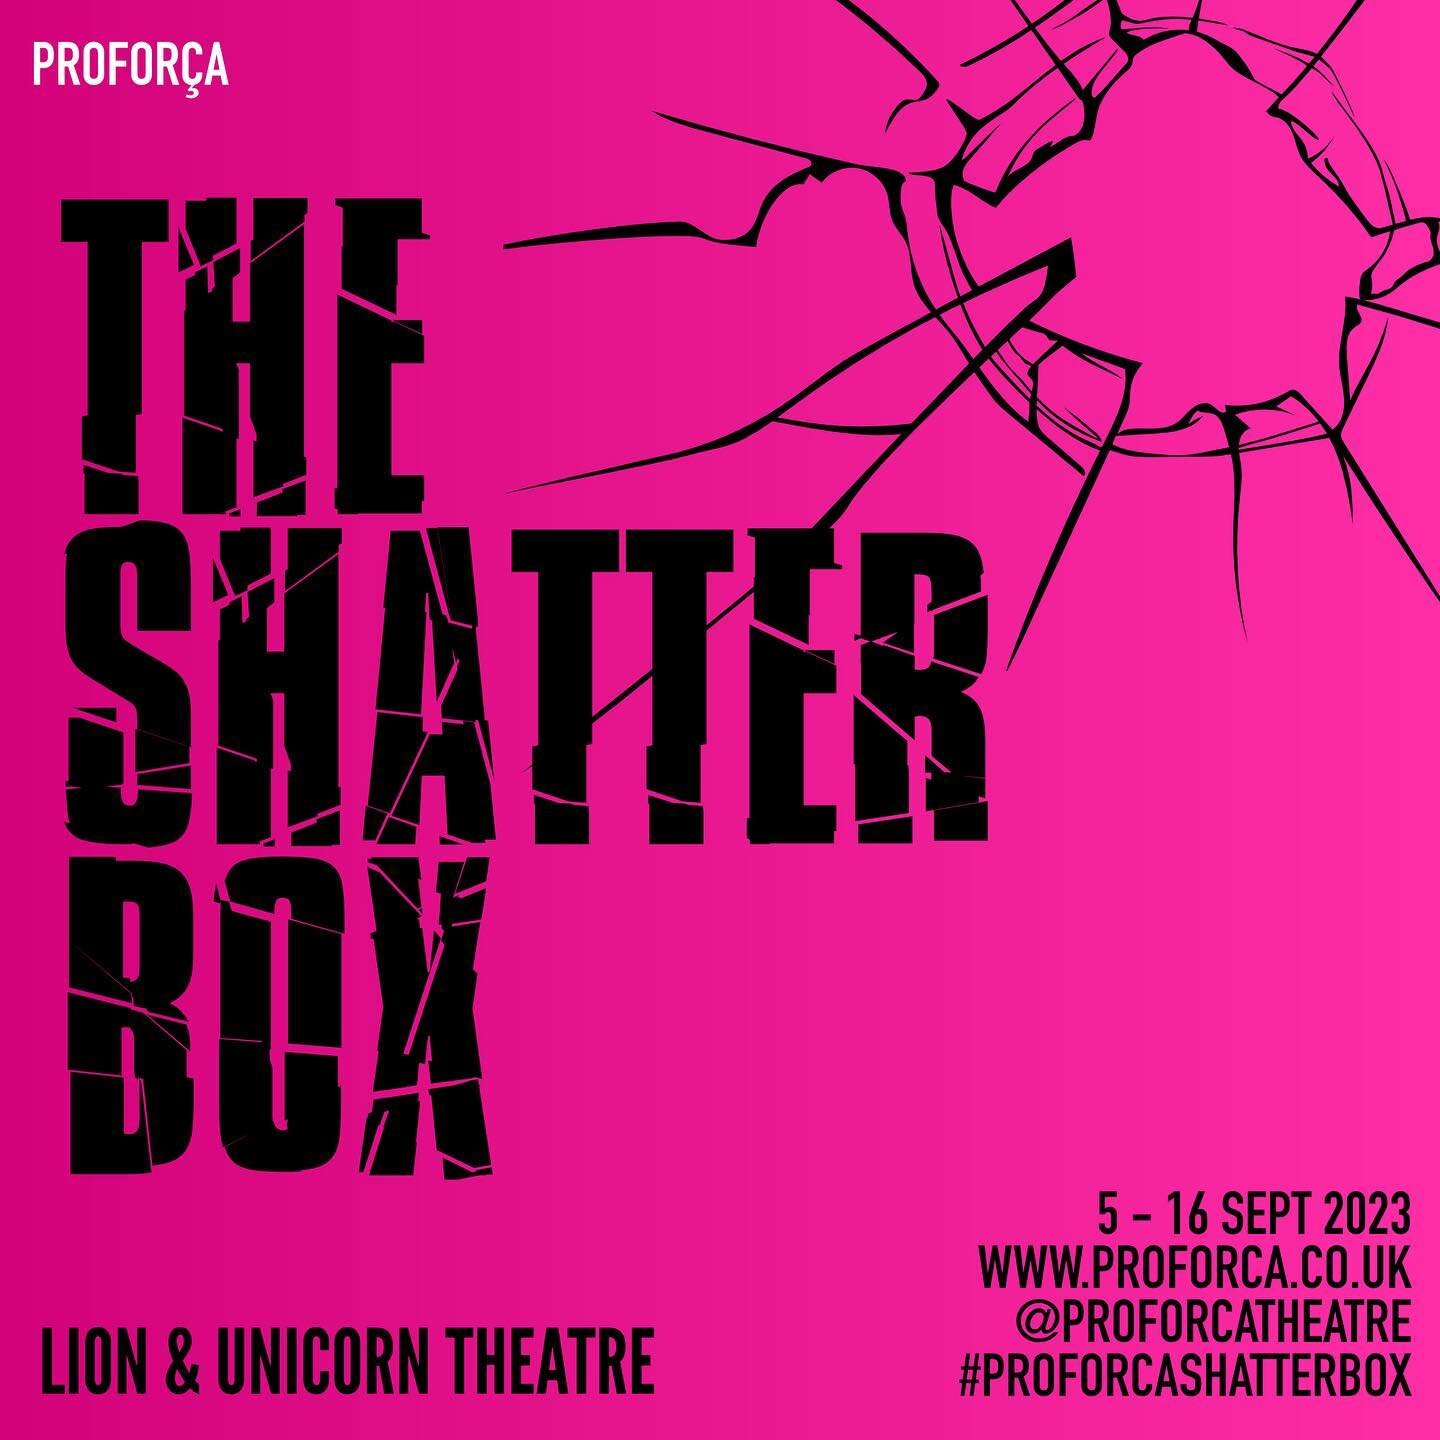 NEW SHOW ANNOUNCED:

A rollercoaster dystopian cat-and-mouse tango of interrogation, confession, staying alive and lying through your teeth - #TheShatterBox opens AW2023 @LandUTheatre this September.

Casting announcement to follow.

🔽More info here